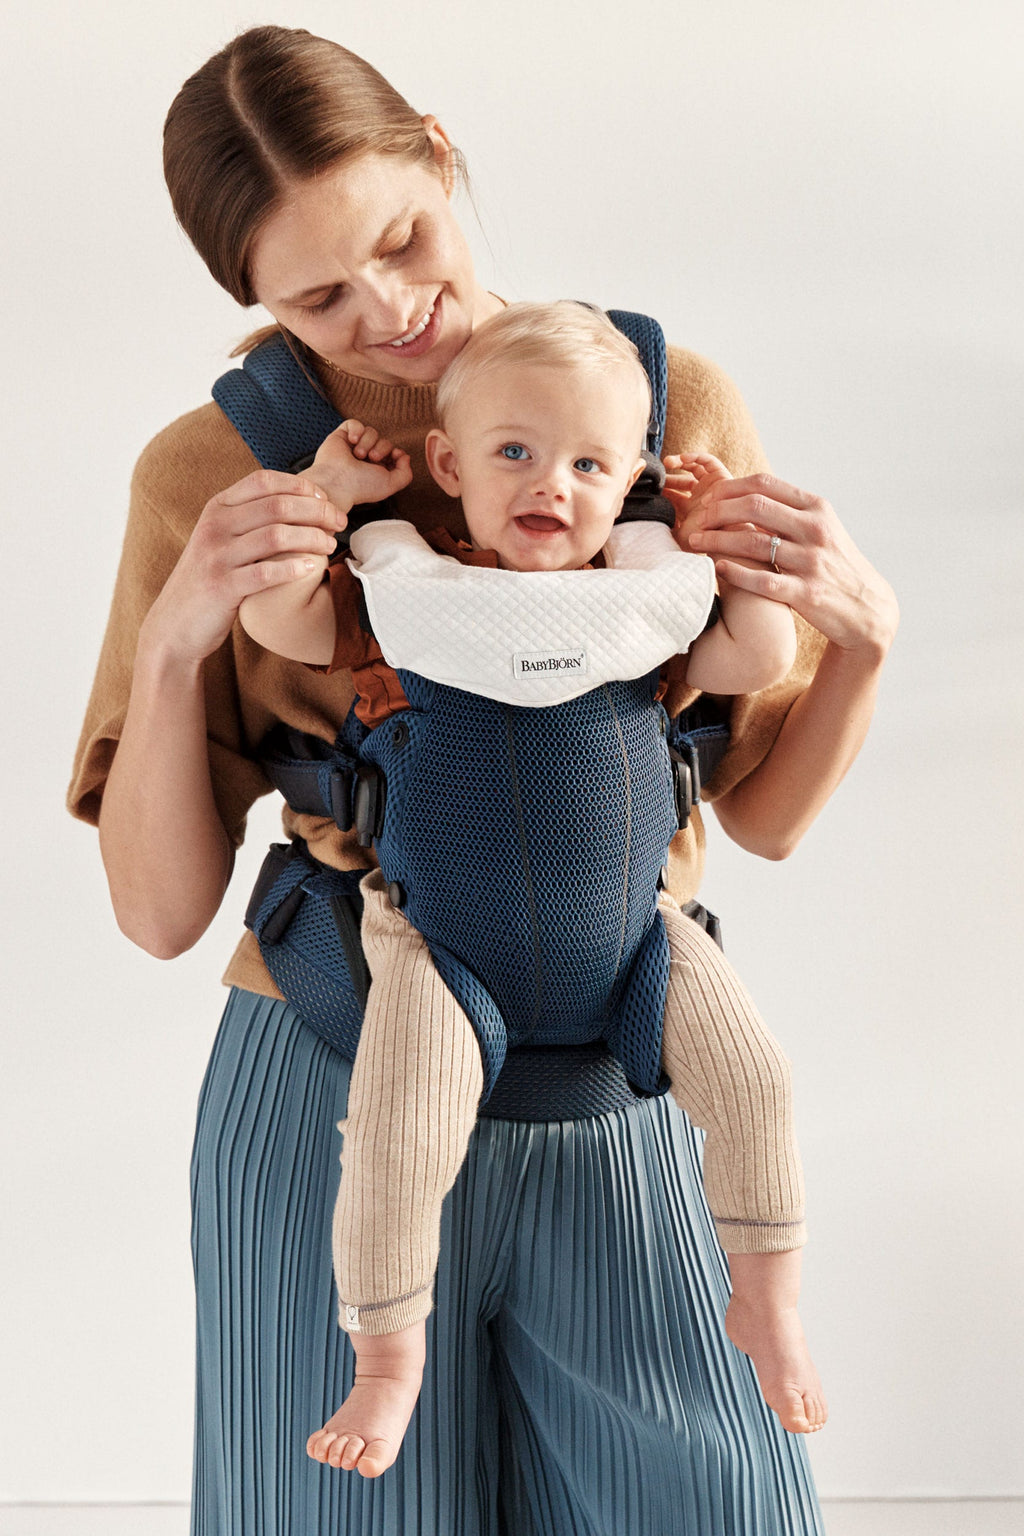 Baby Bjorn - Baby Carrier Harmony With Bib - Navy Blue - 3D Mesh